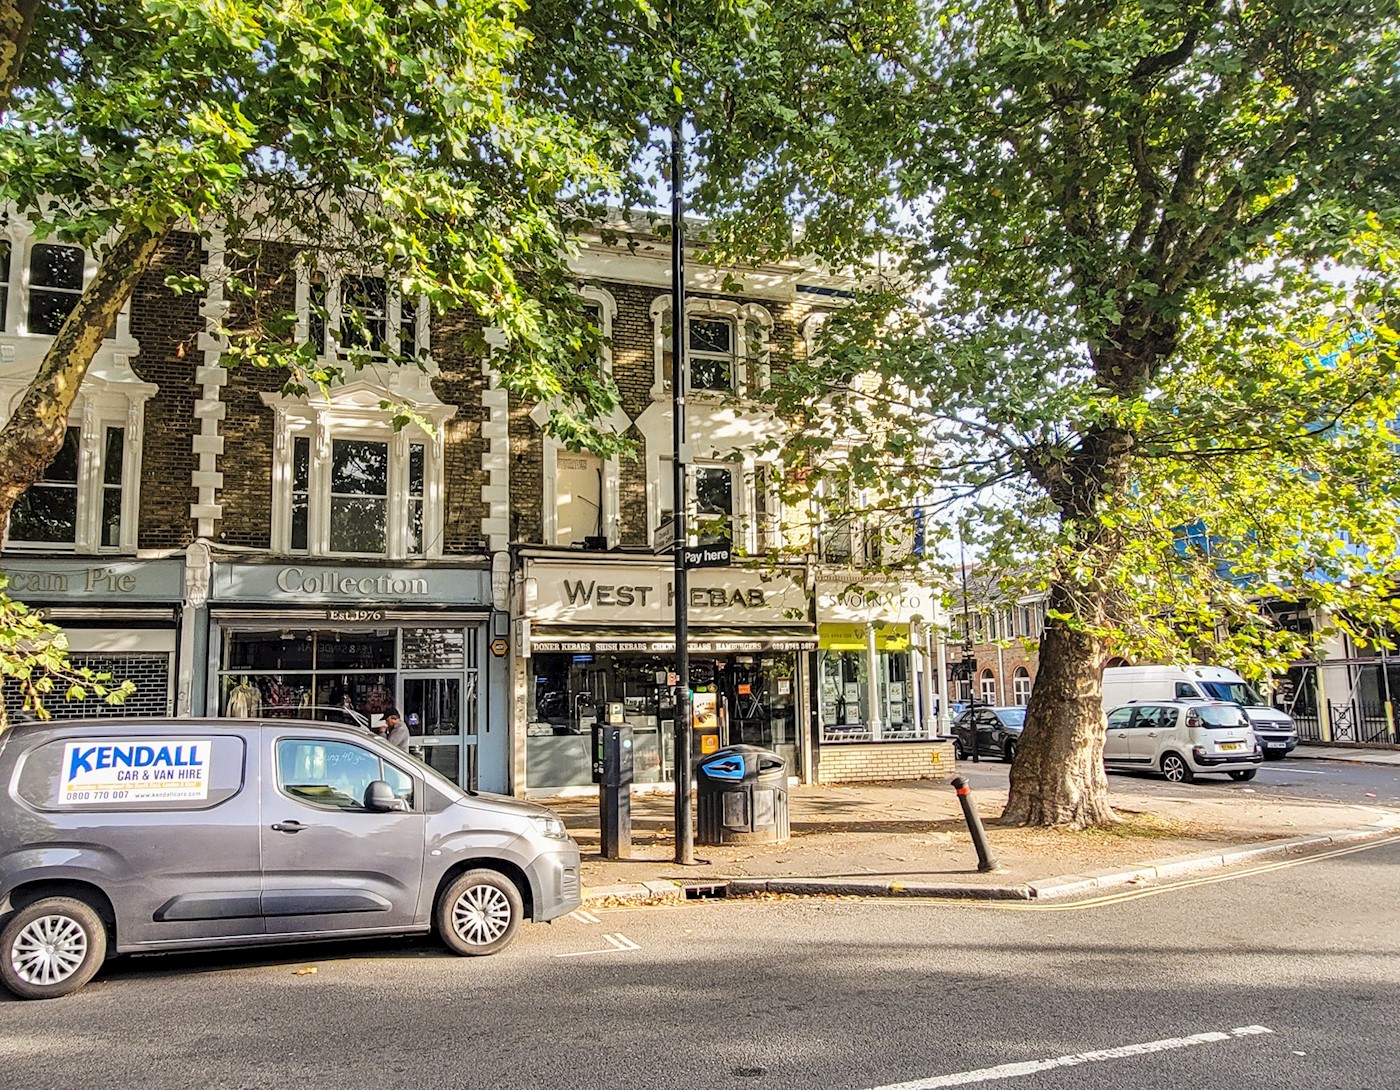 196 Chiswick High Road, Chiswick, W4 1PD 1/5